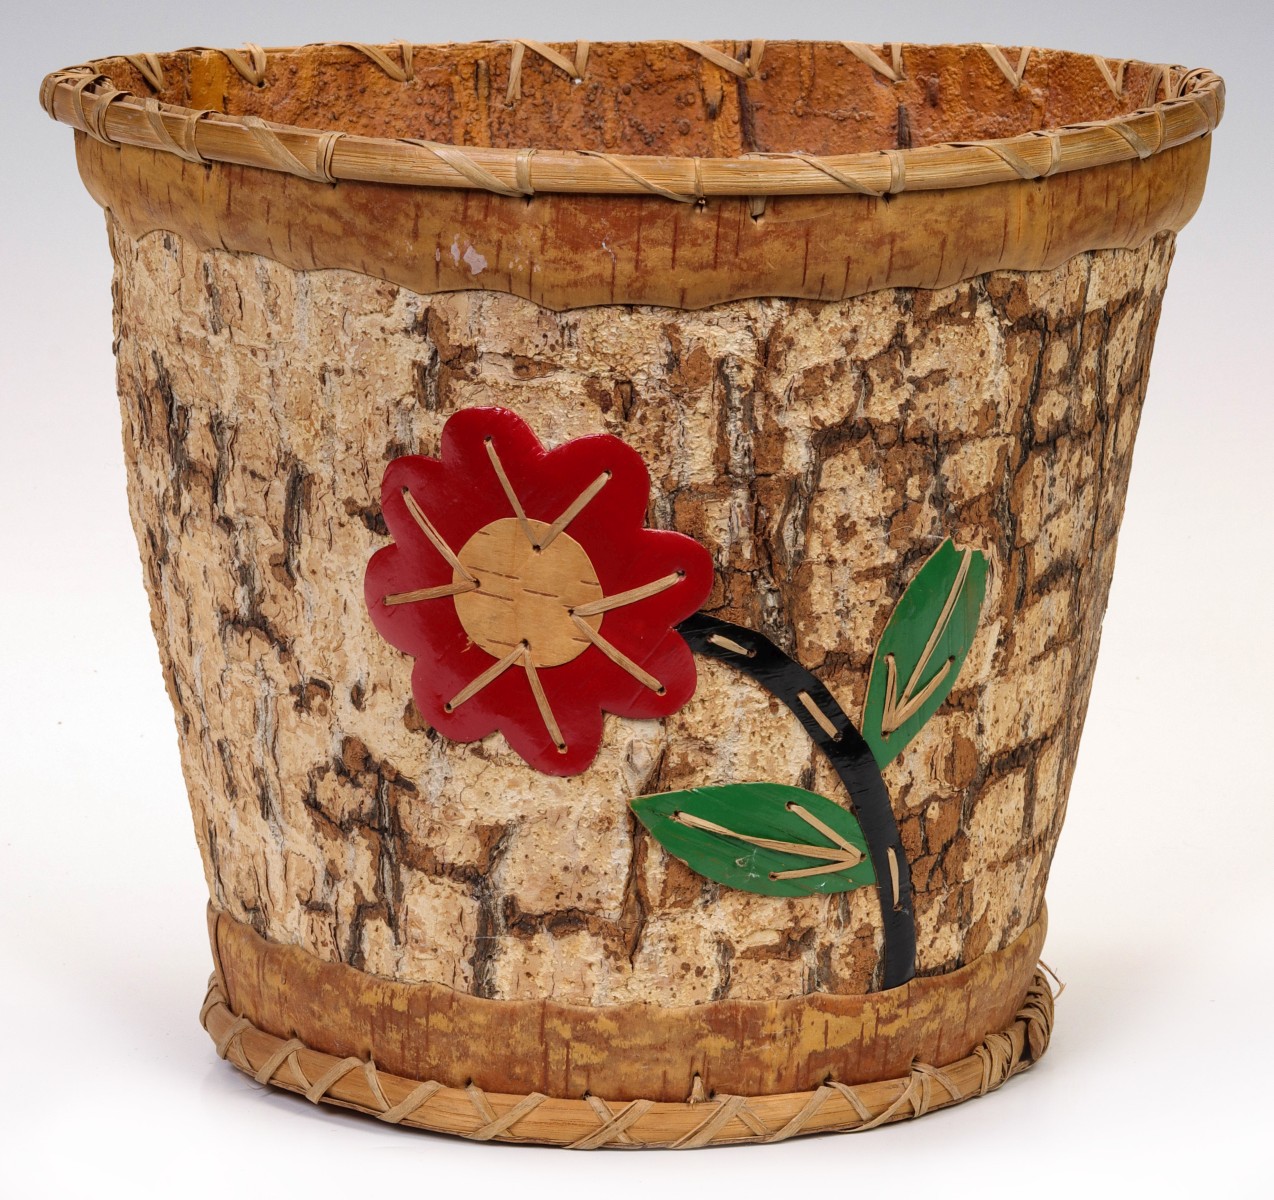 AN OJIBWE BIRCH BARK CONTAINER WITH RED & GREEN FLOWER